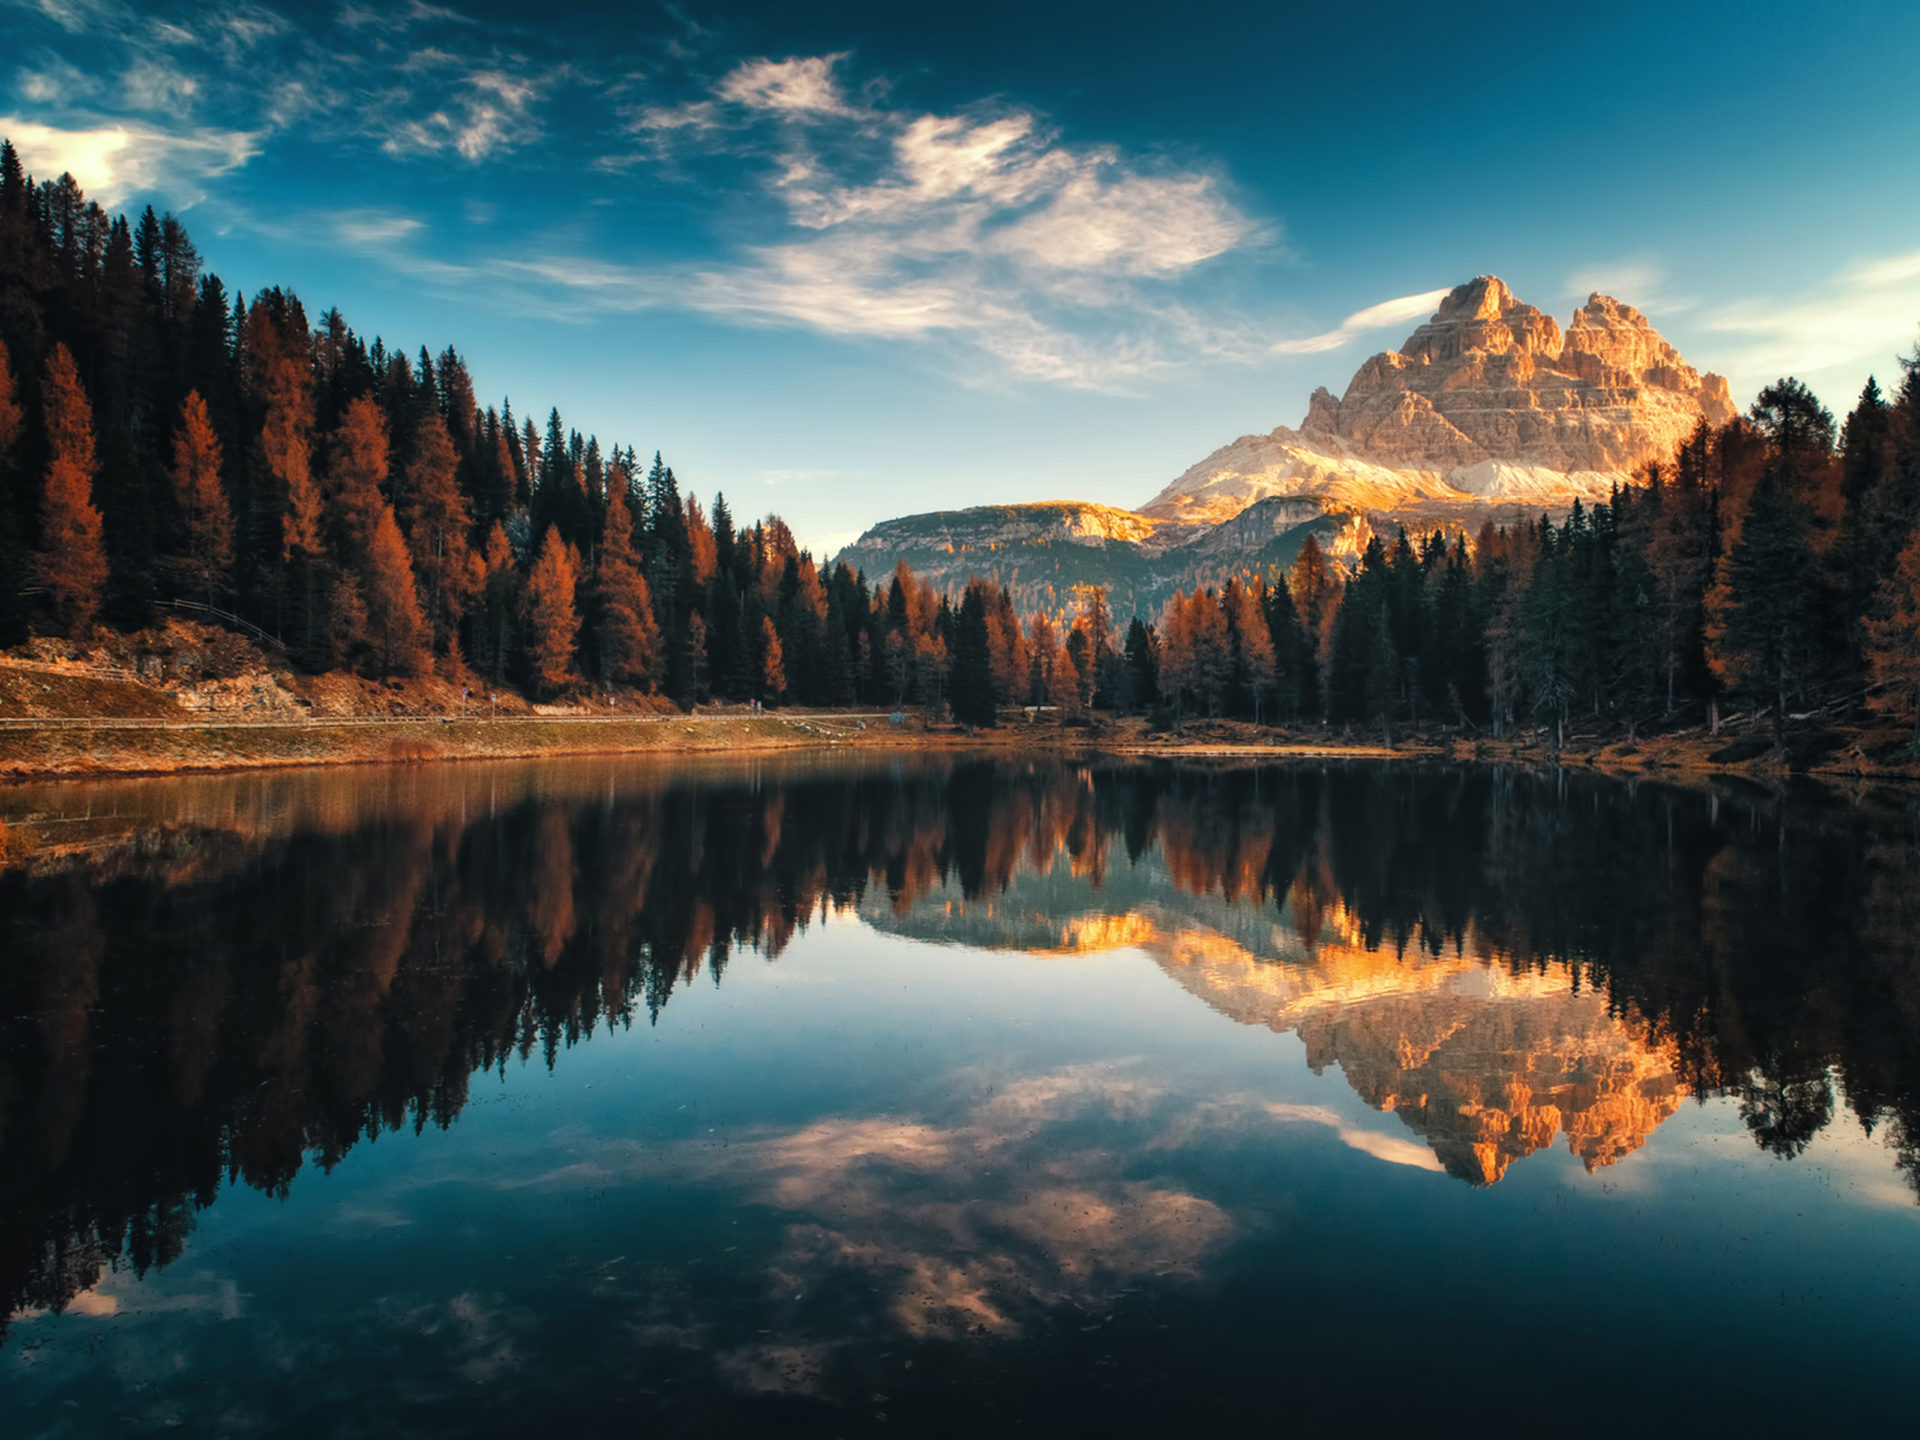 Dolomiti Italy Autumn Lago Antorno Landscape Photography Desktop HD Wallpaper For Pc Tablet And Mobile 3840x2400, Wallpaper13.com